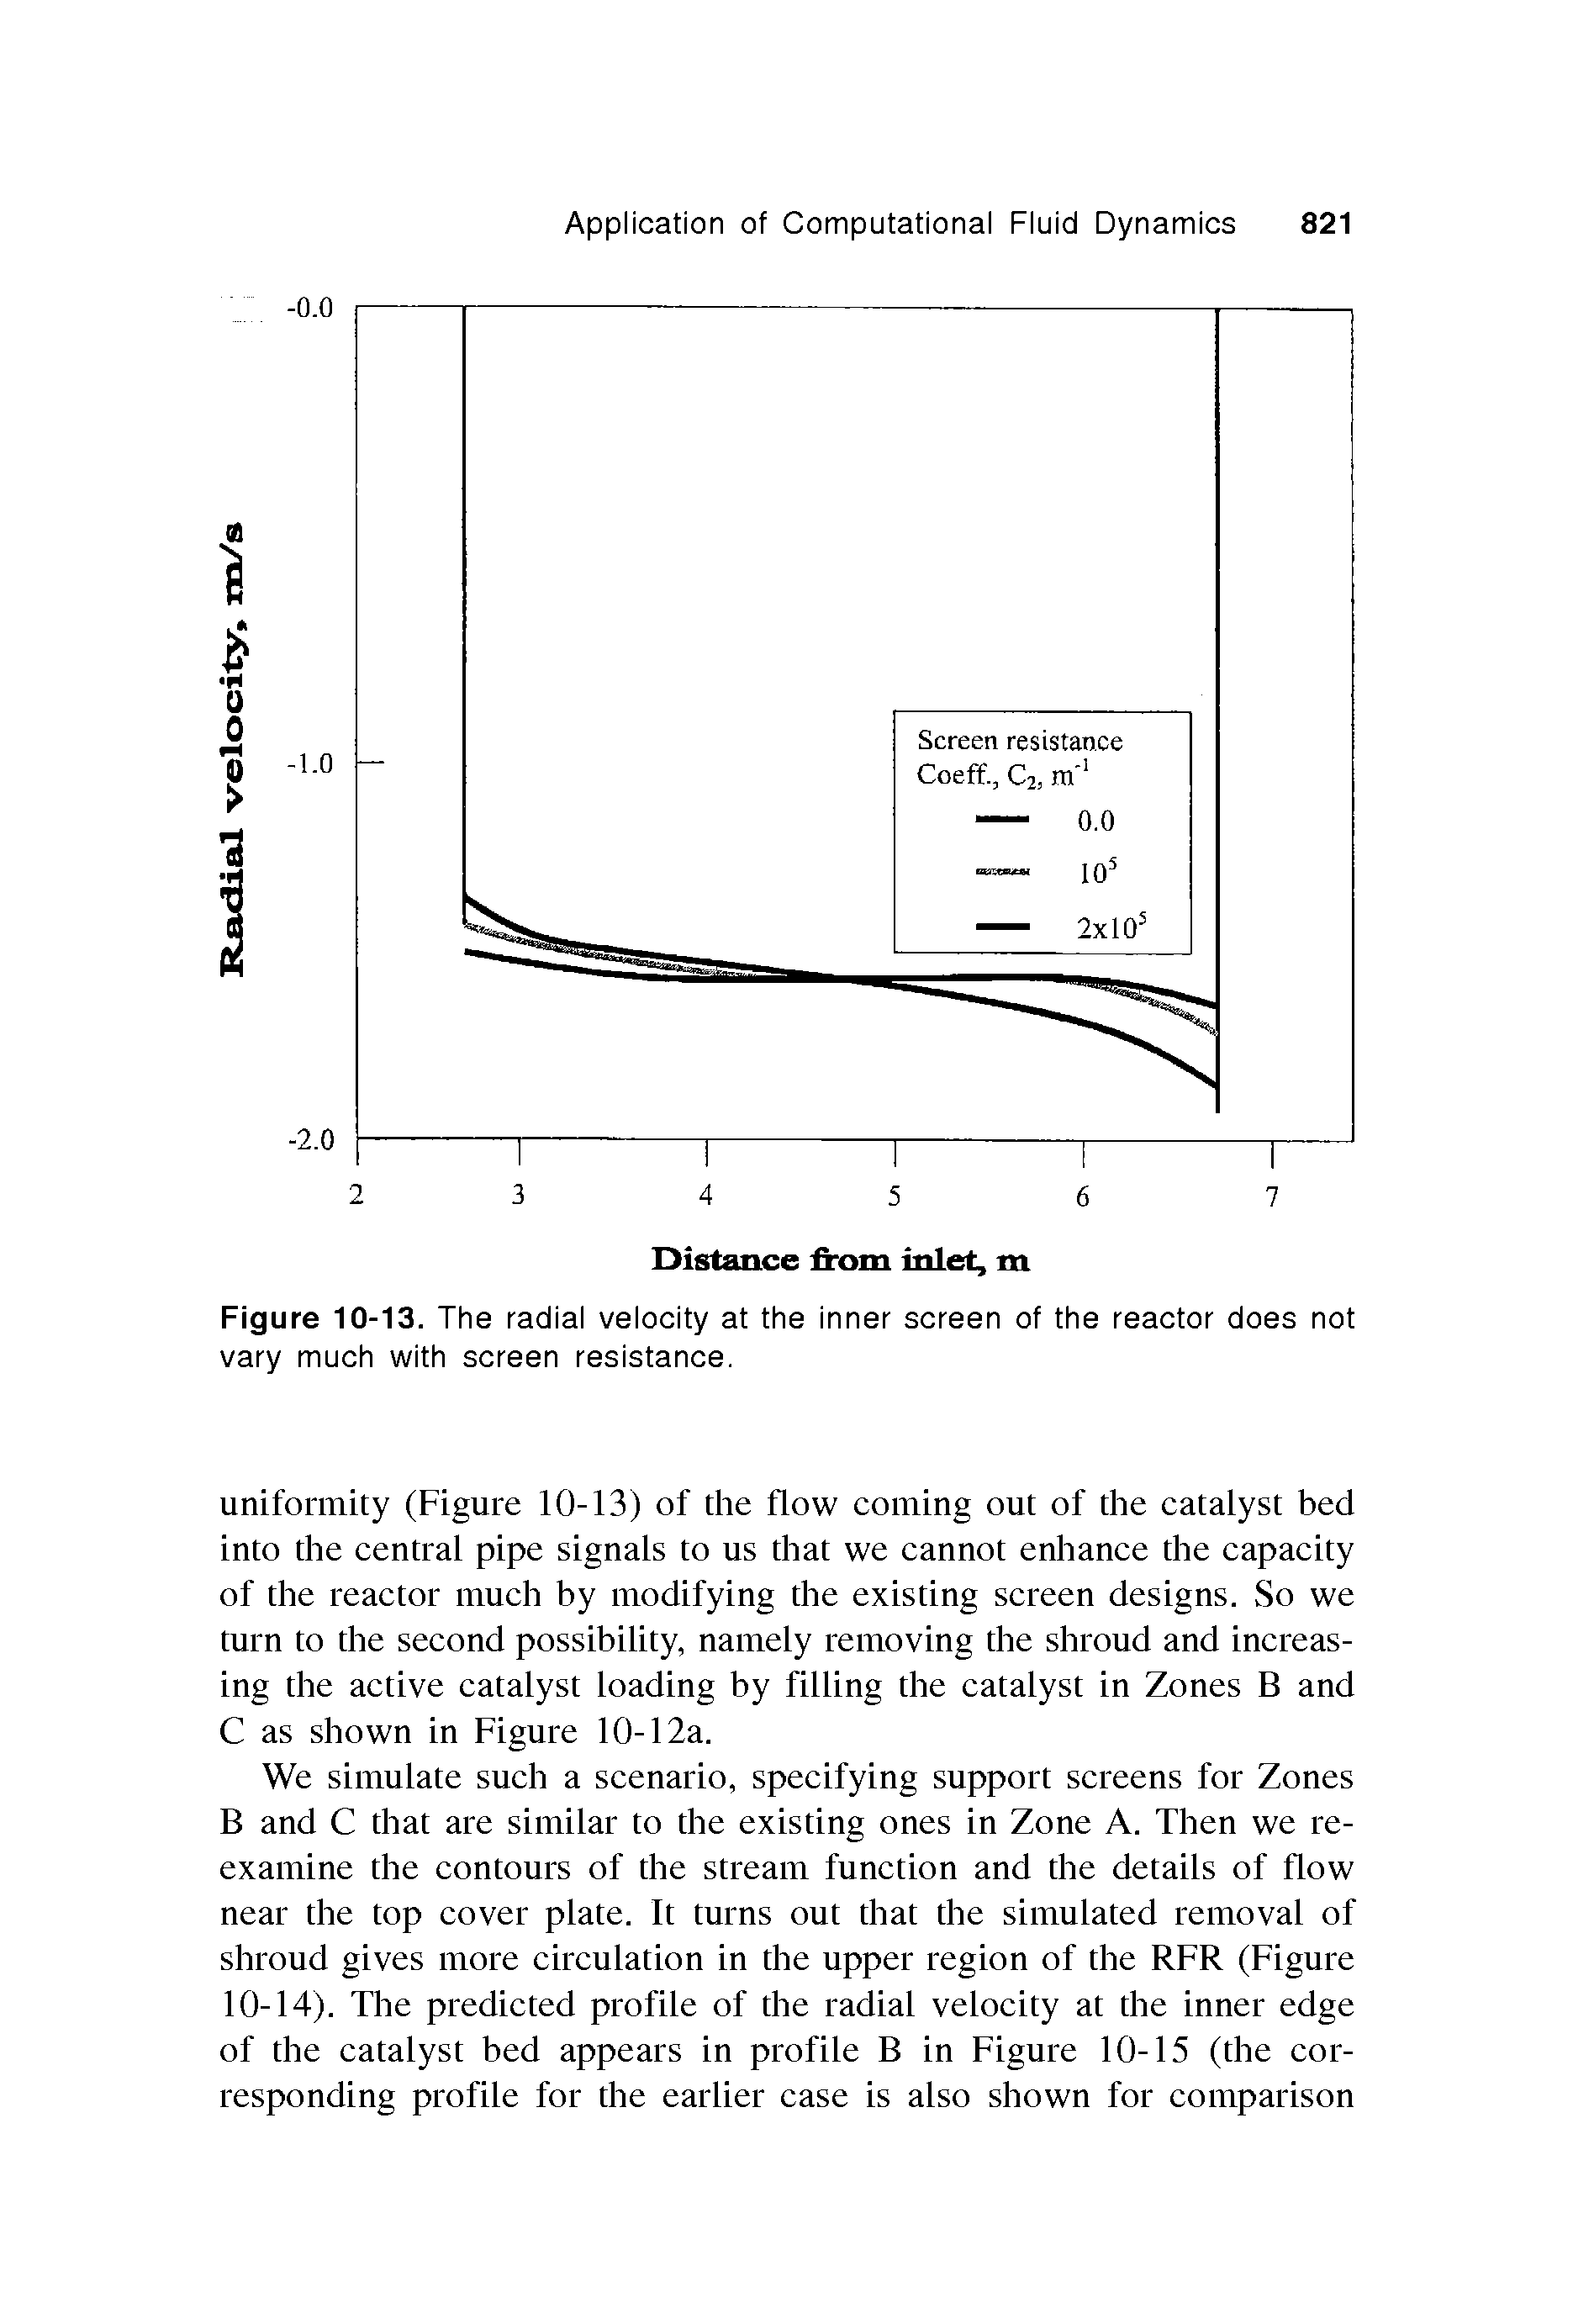 Figure 10-13. The radial velocity at the inner screen of the reactor does not vary much with screen resistance.